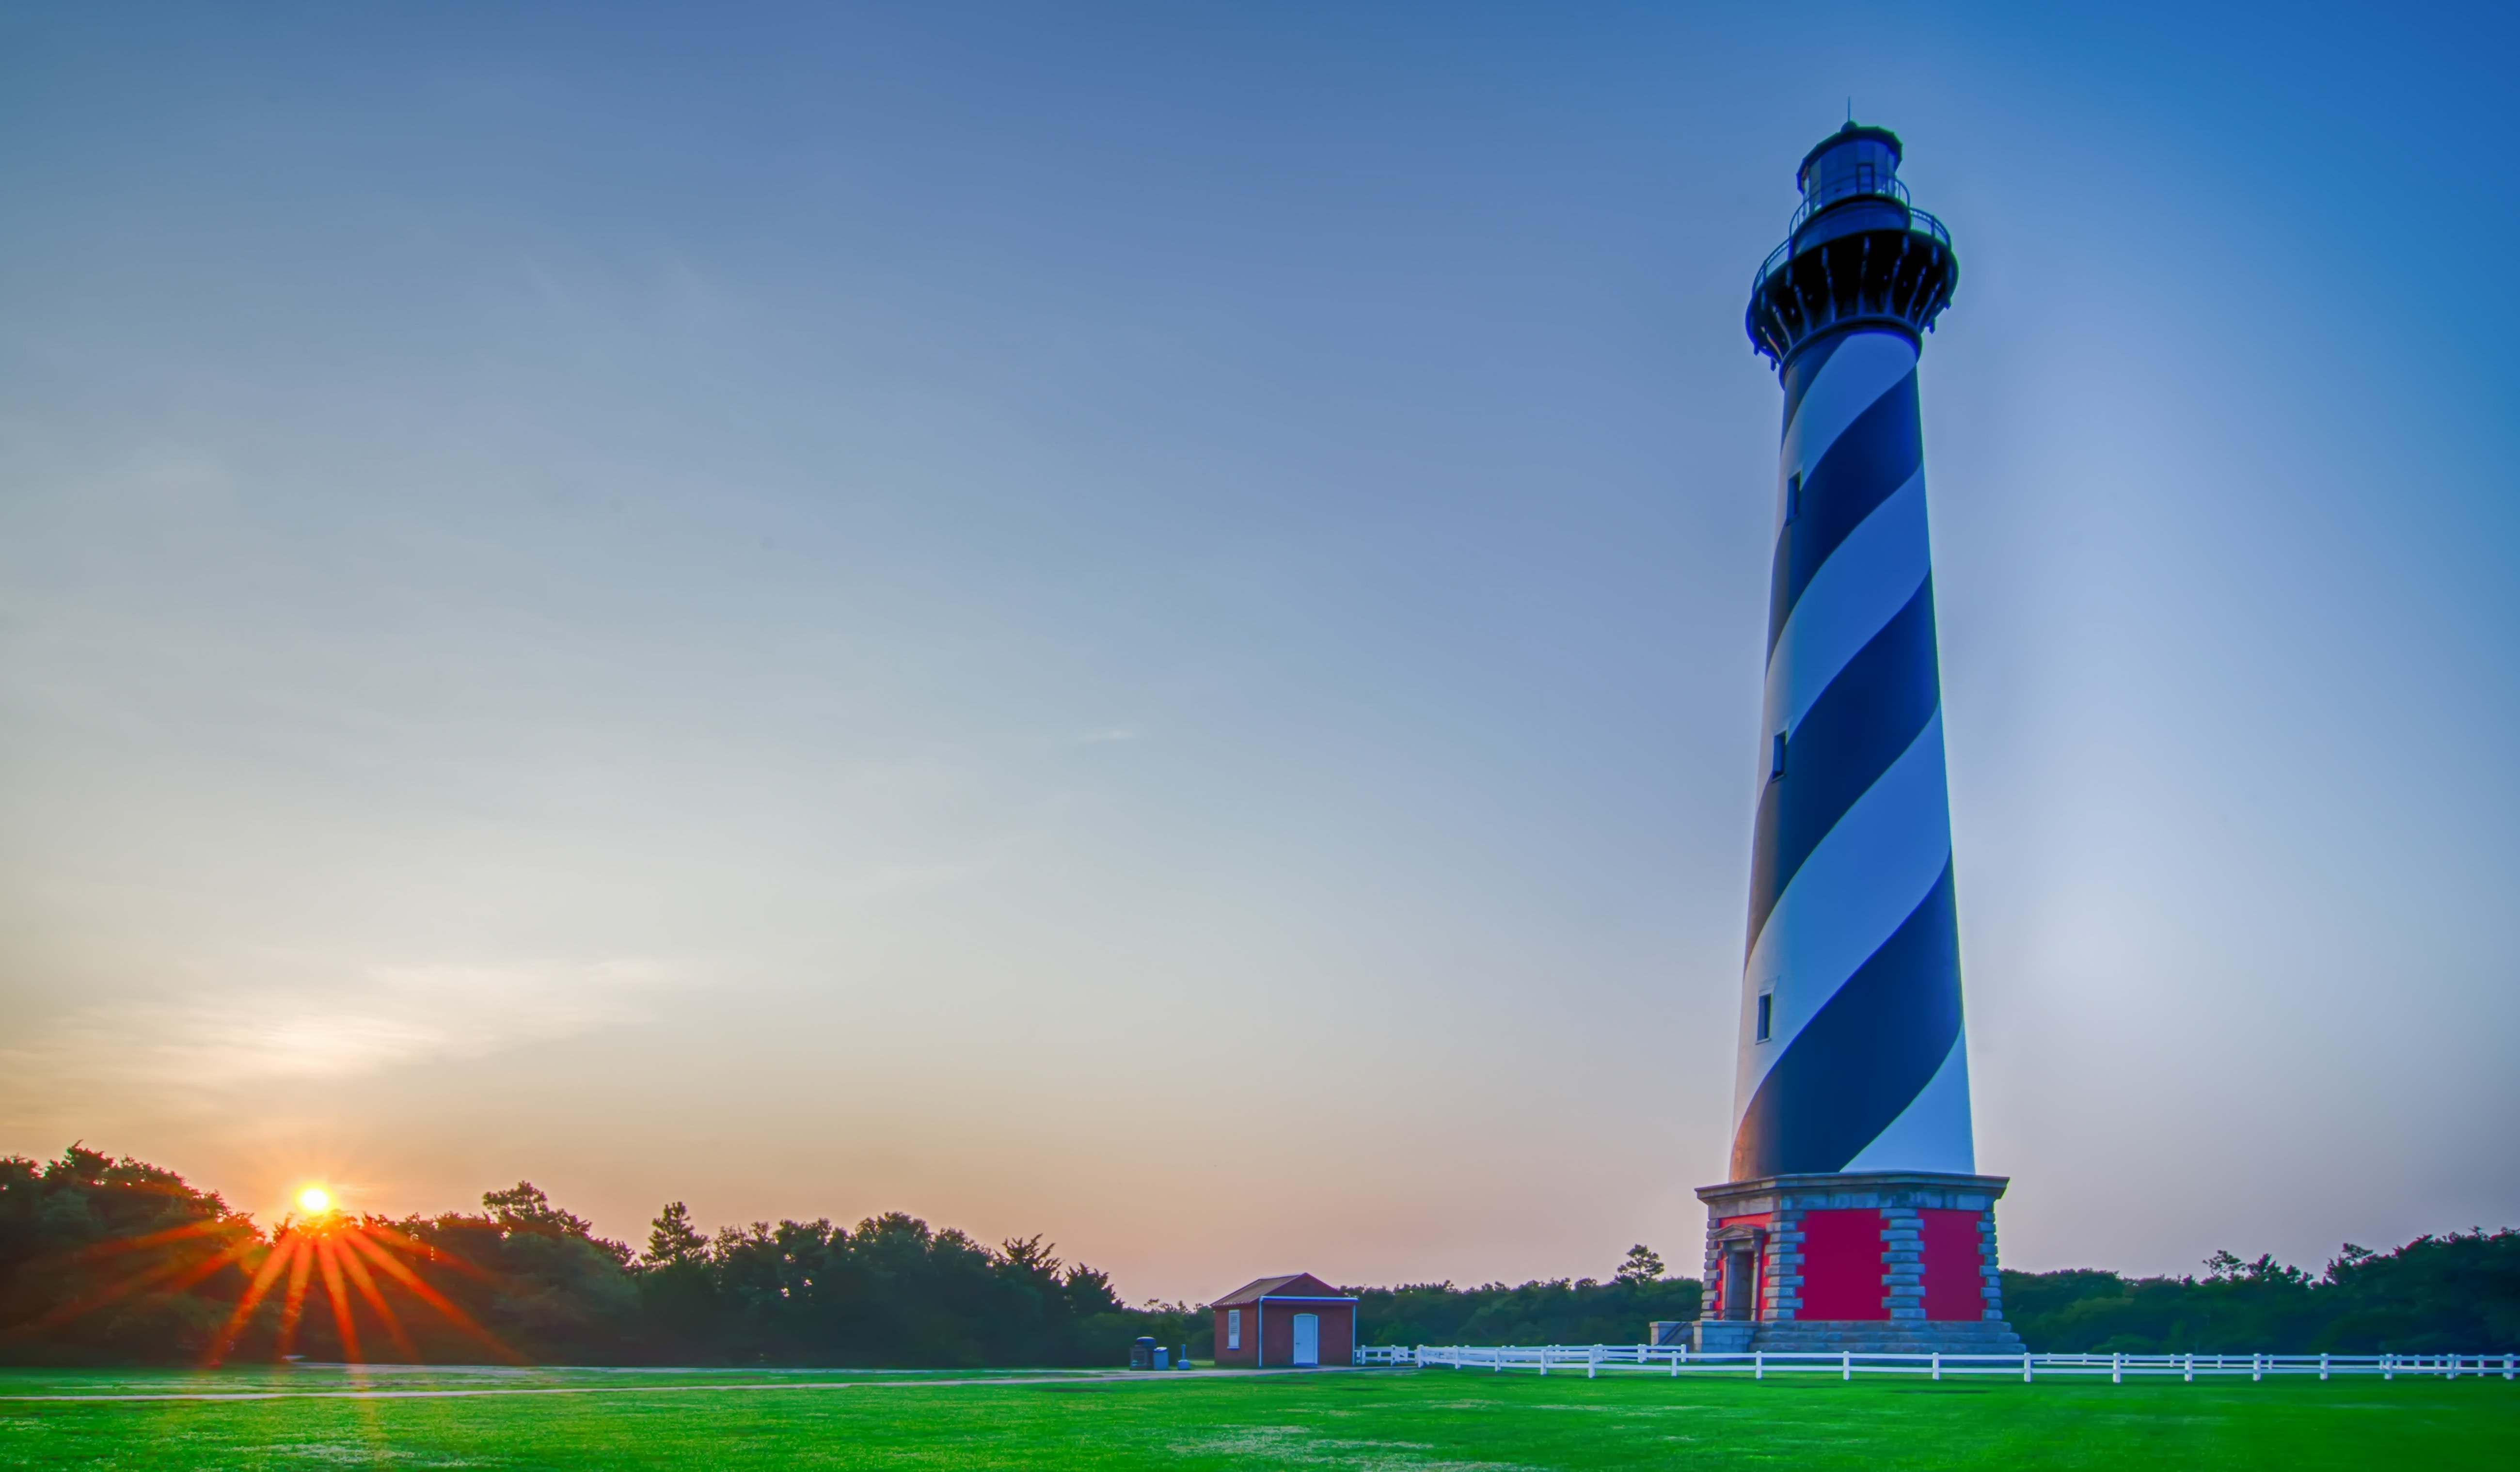 Experience Fall in the Outer Banks - Cape Hatteras Lighthouse